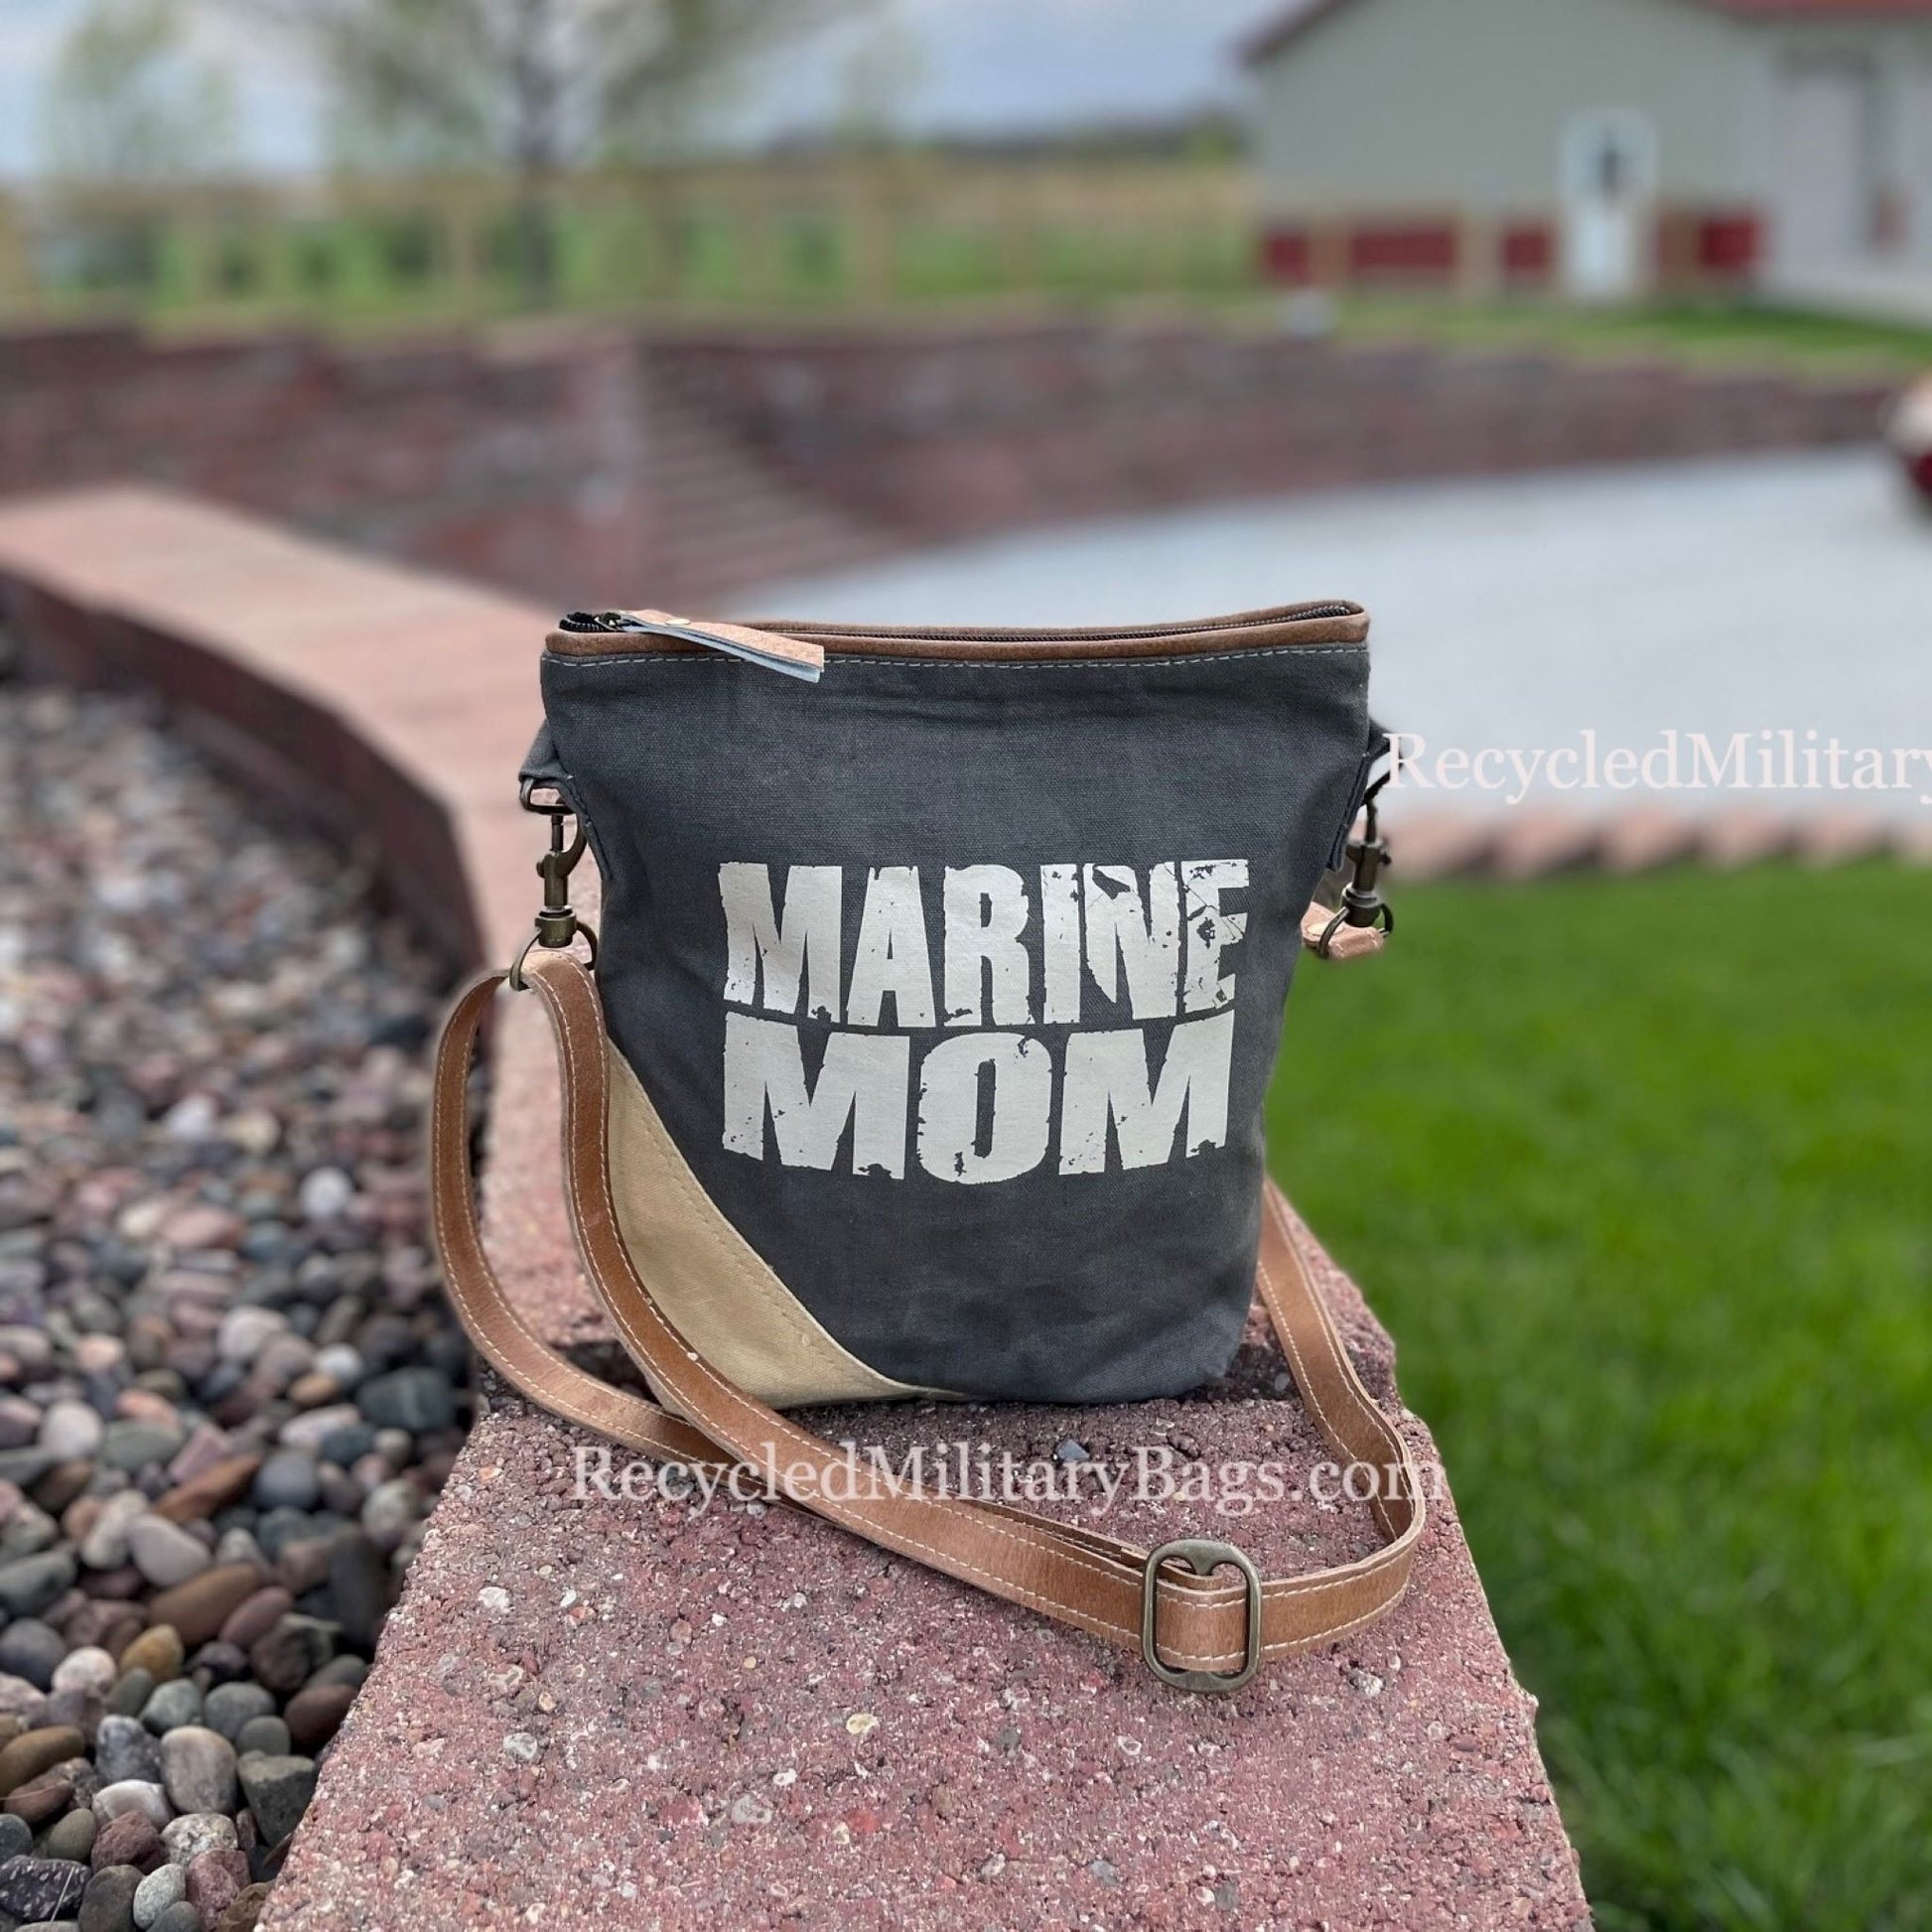 Marine Mom Crossbody Canvas Bag - Air Force Proud! Great Gift for